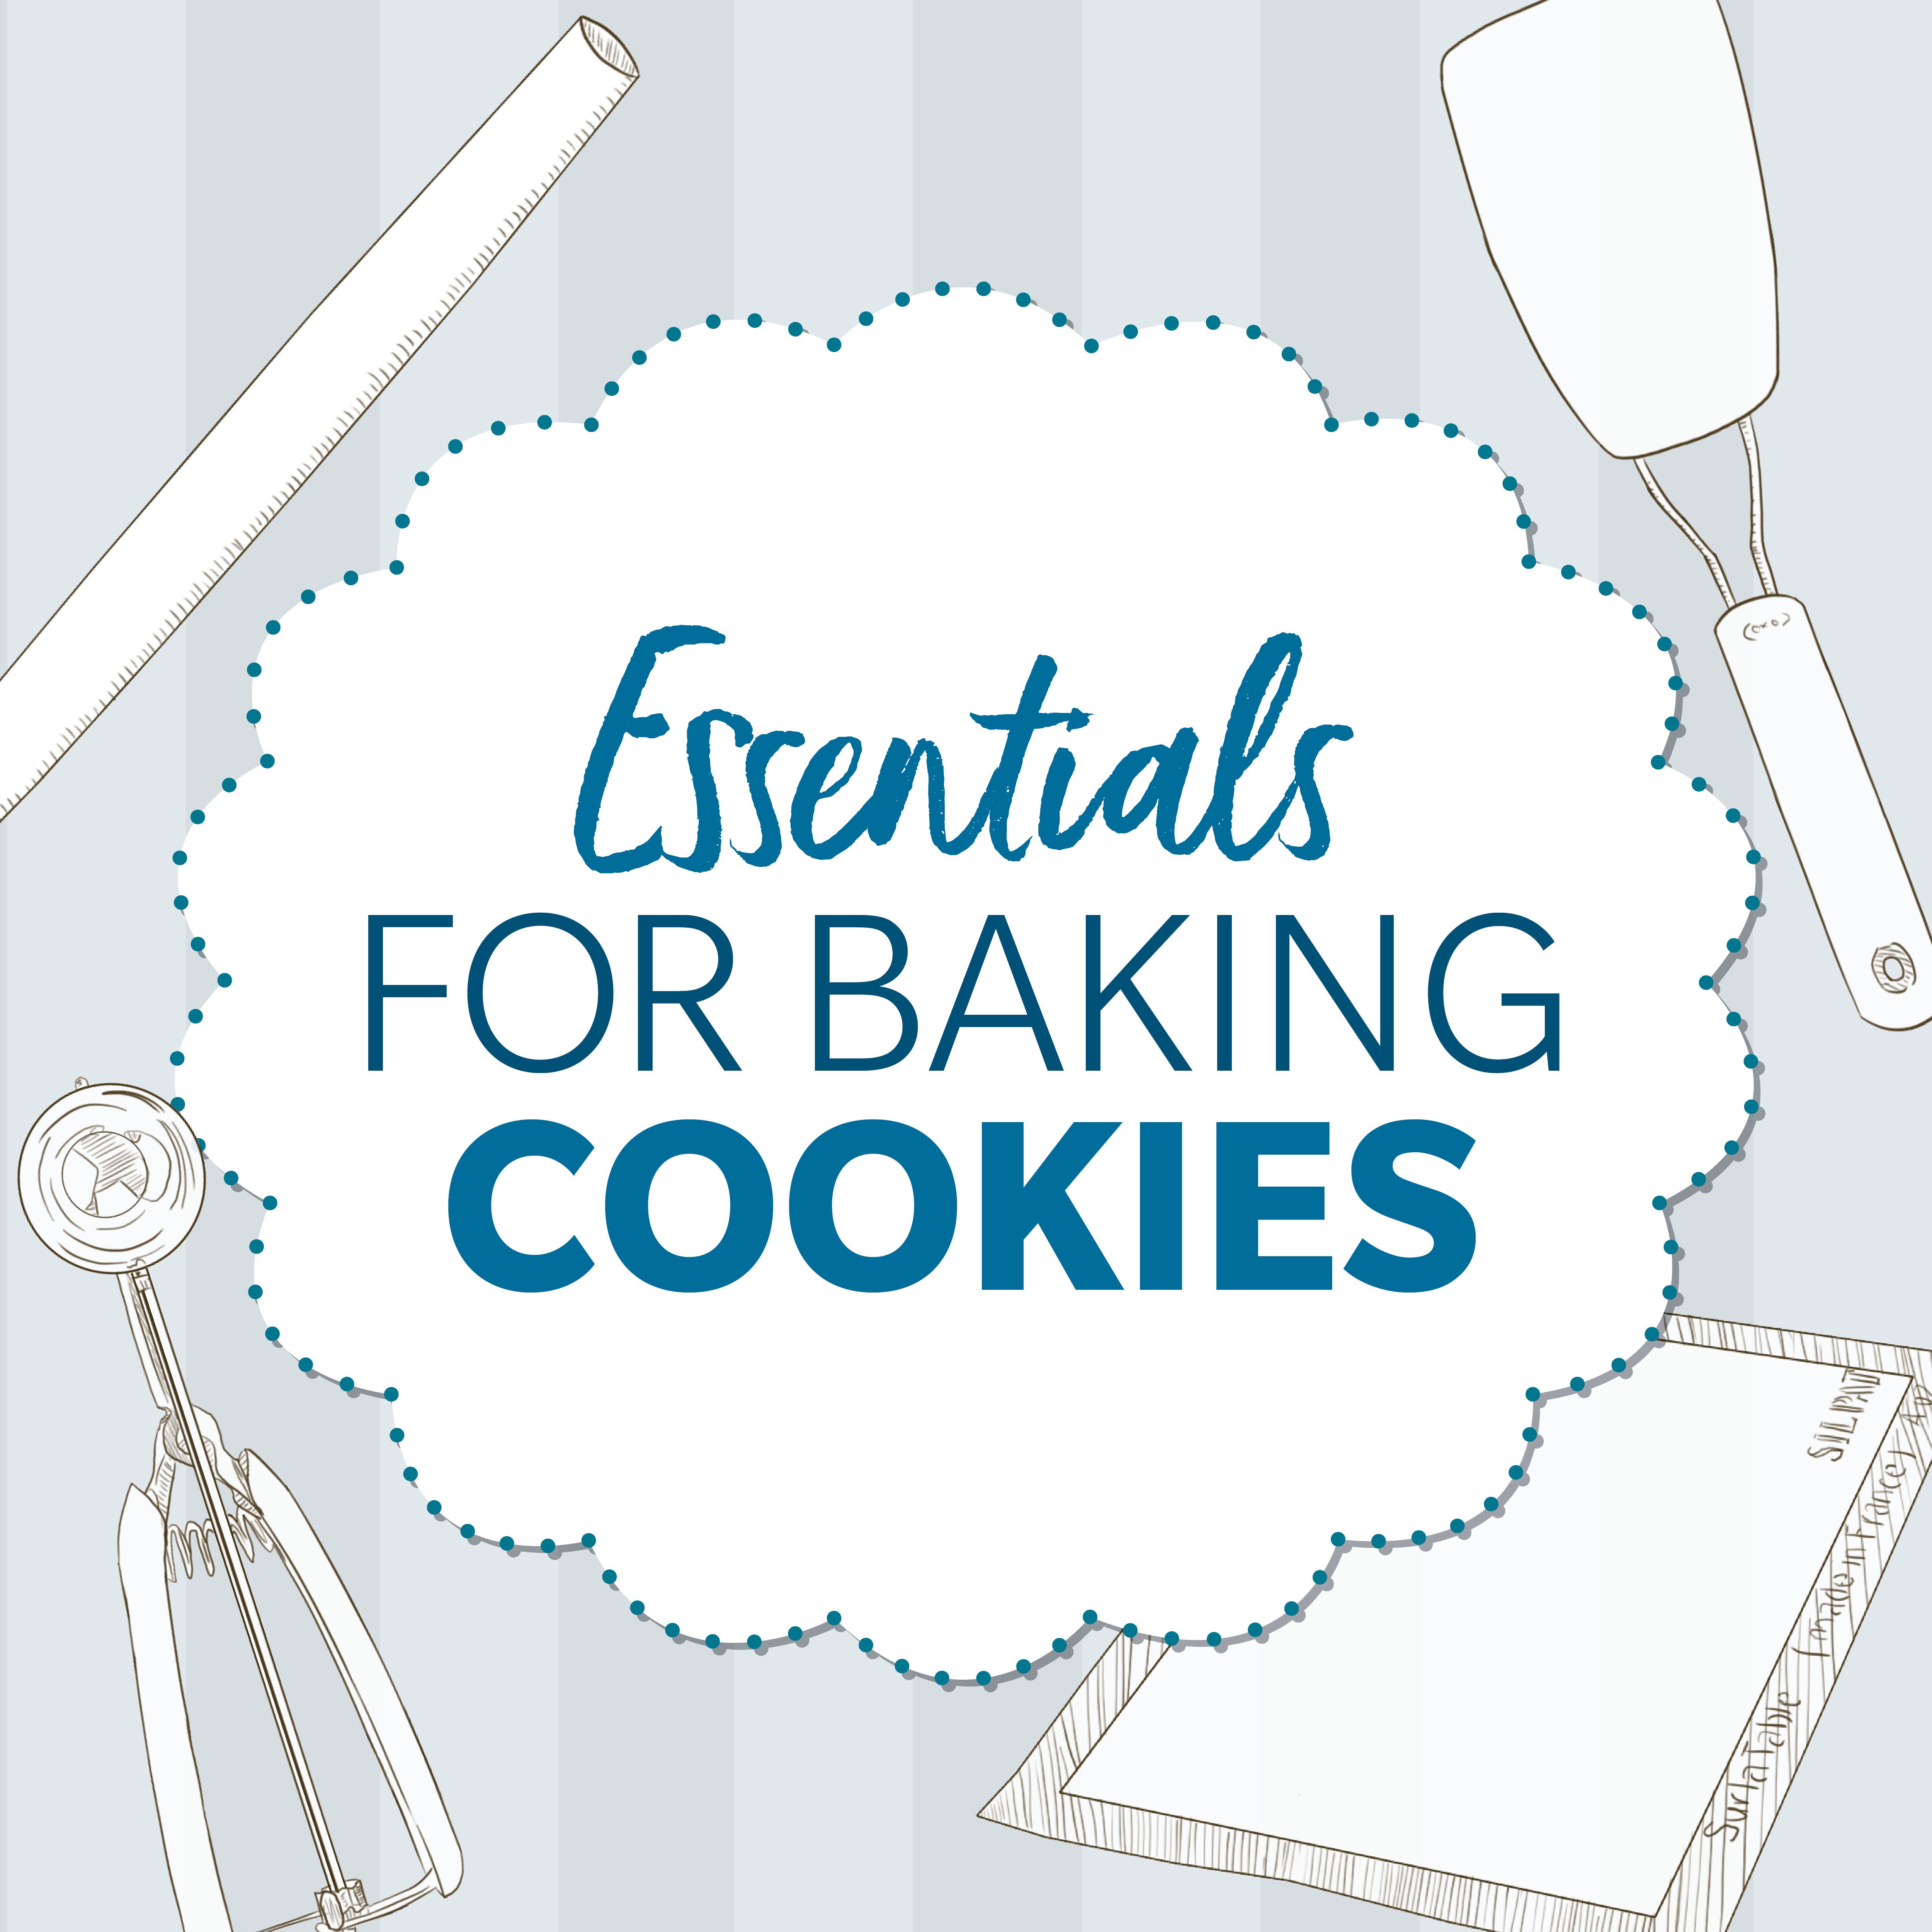 https://www.tasteofhome.com/wp-content/uploads/2019/07/6-Tools-You-Need-to-Make-Baking-Cookies-Easier.jpg